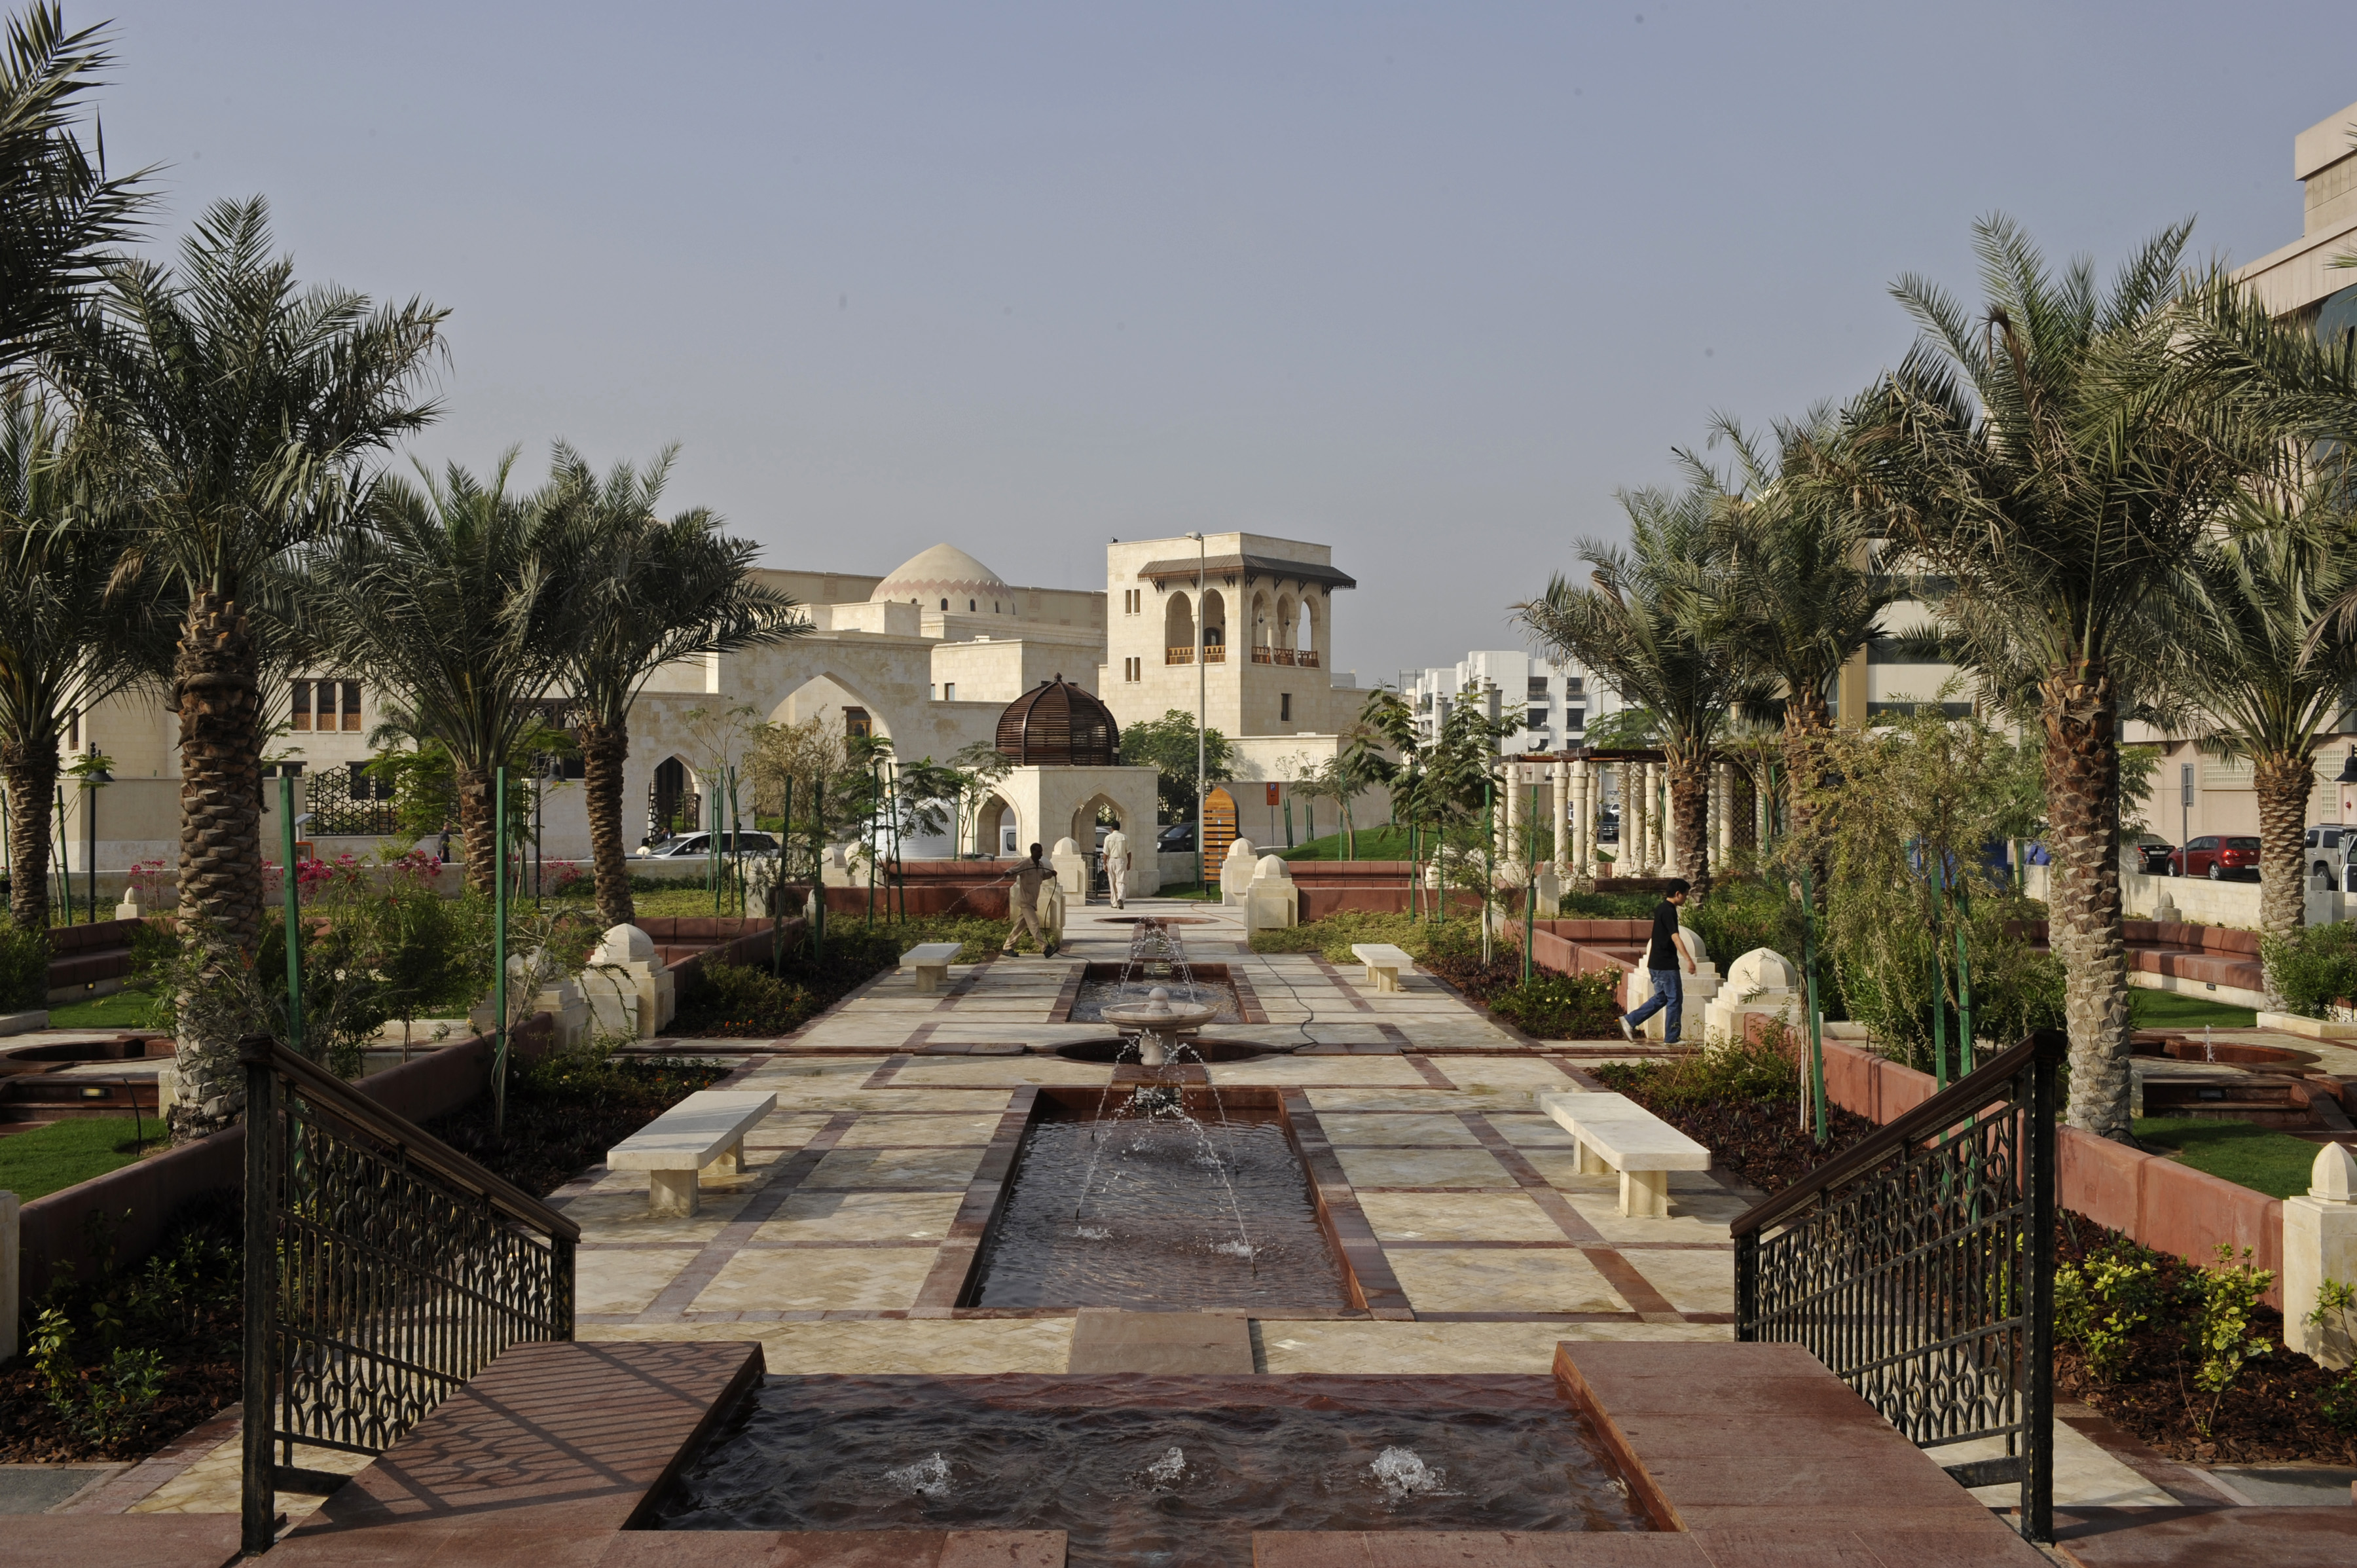 In the Dubai Park, located opposite the Centre, water flows from the fountains along channels that are interconnected with pools. The criss-cross fountains are inspired by the Al-Hambra. Photo: Gary Otte